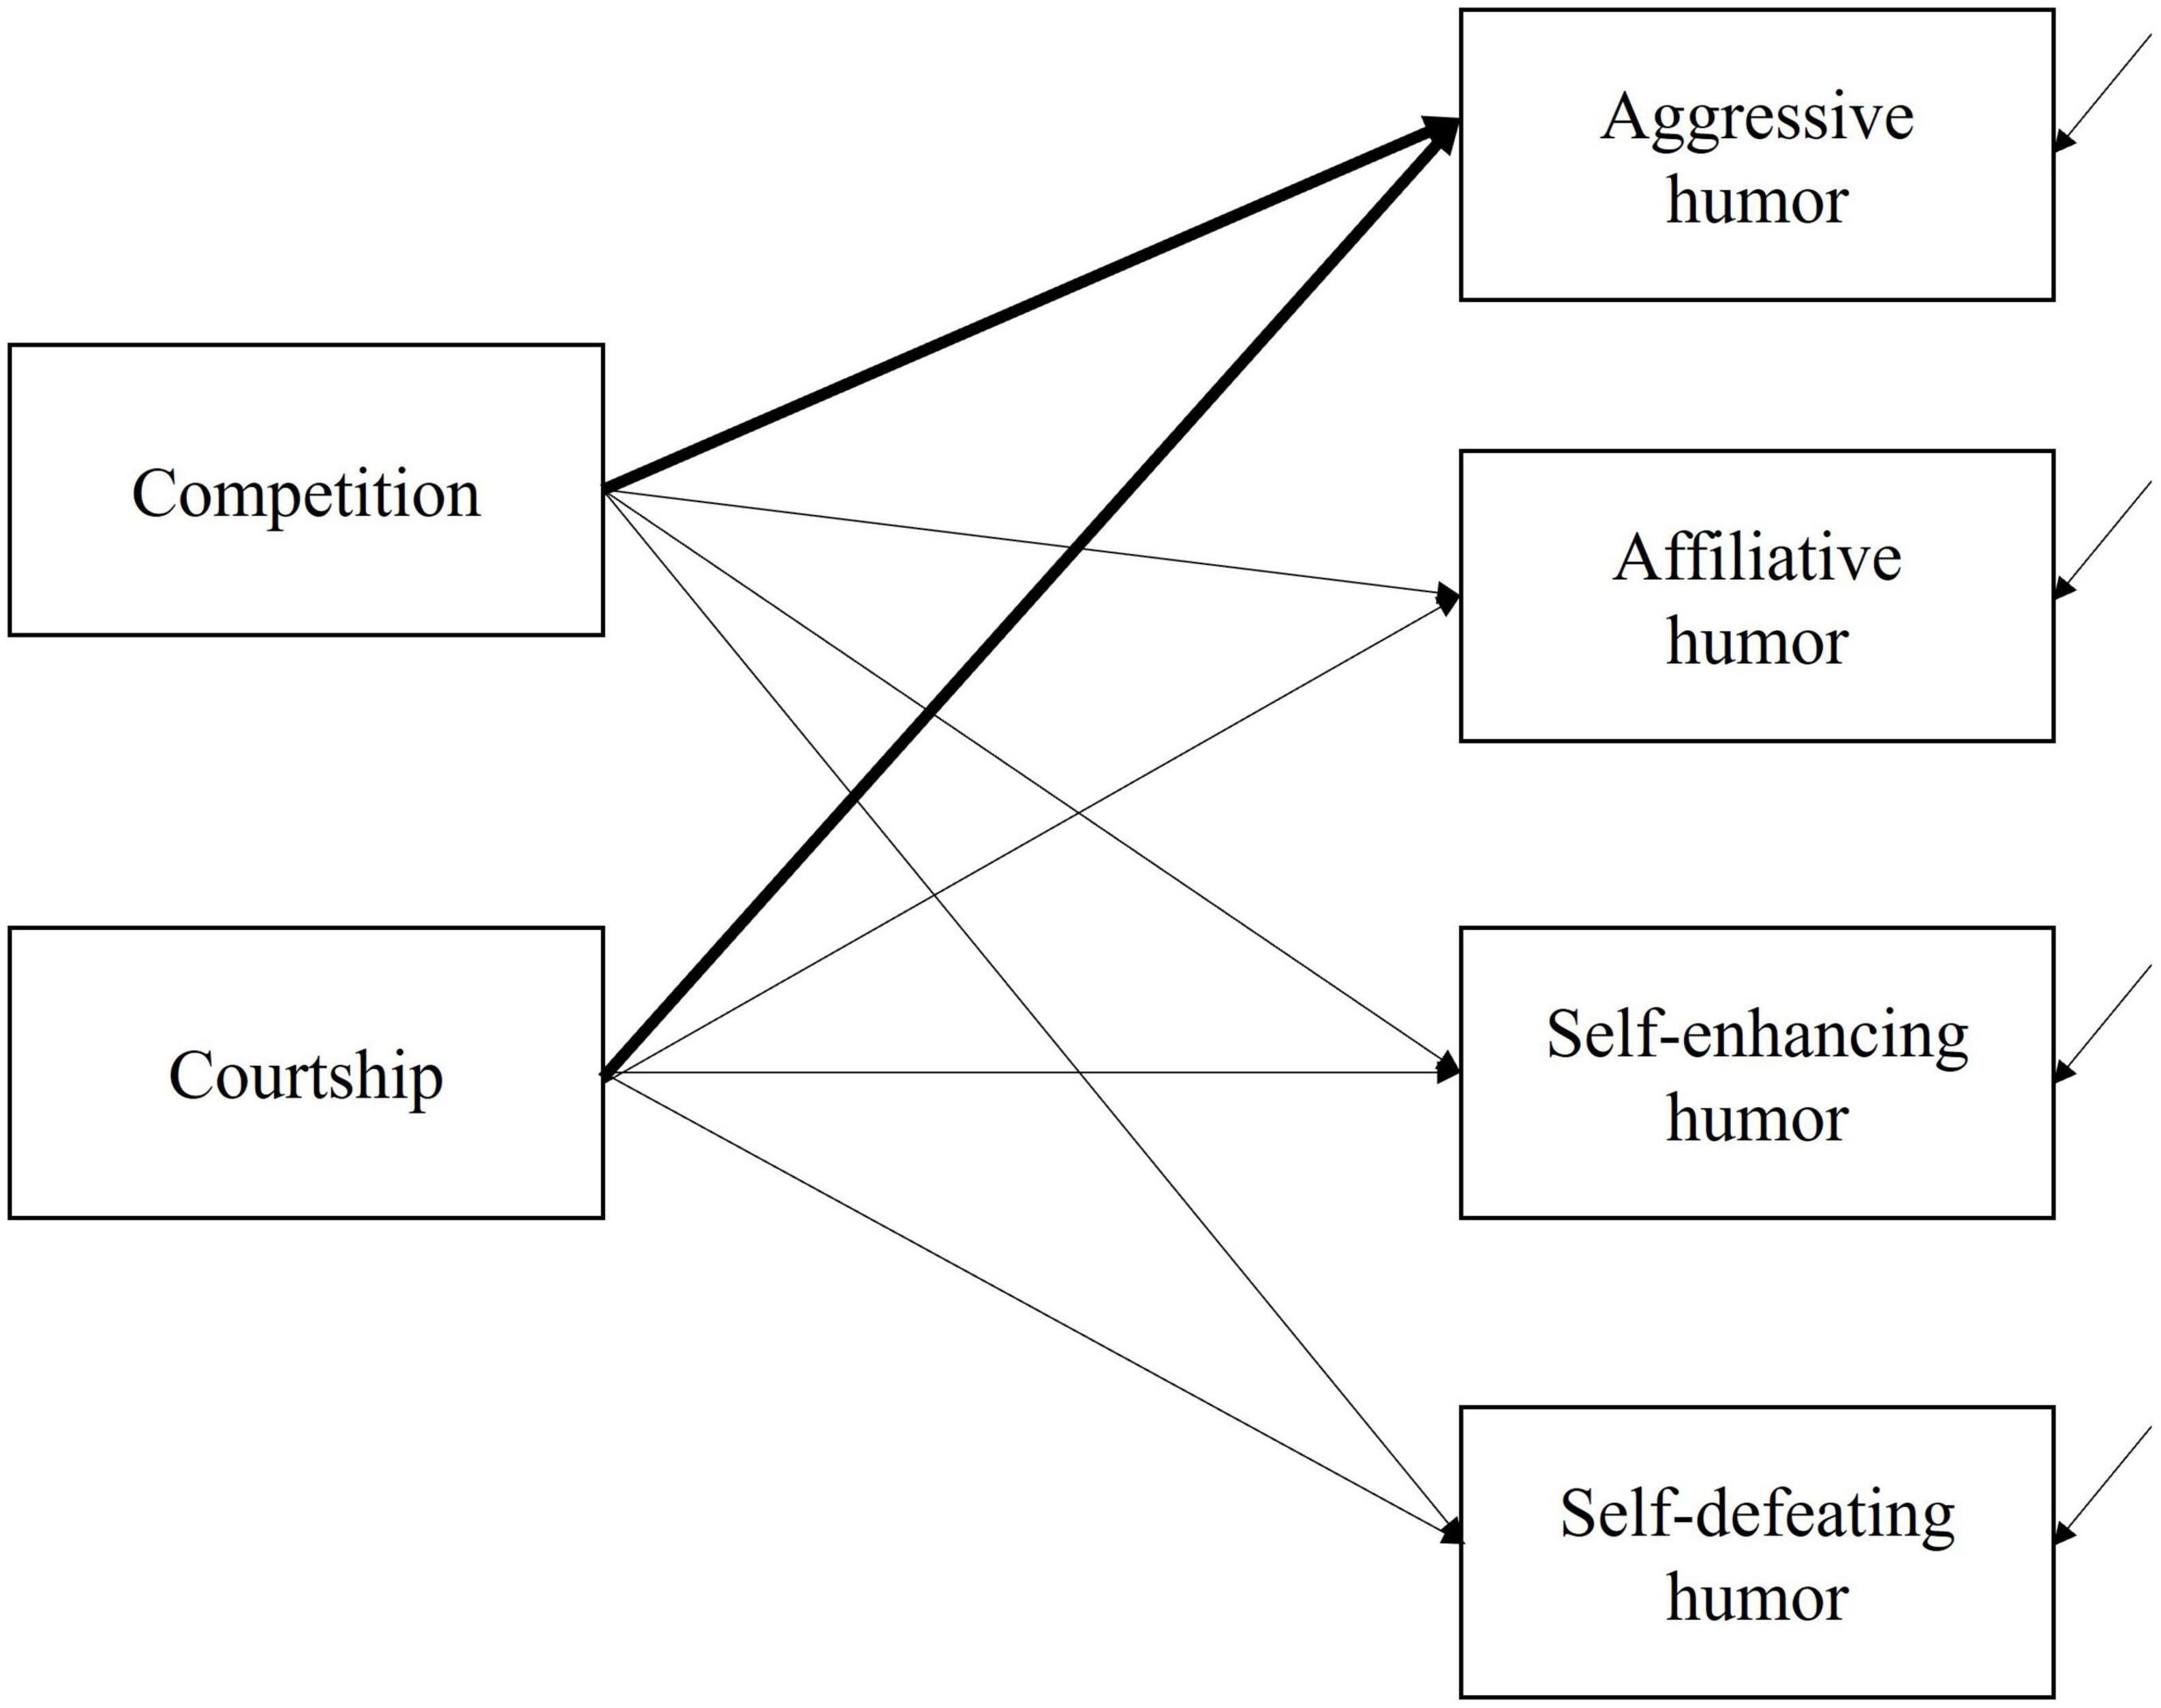 The motive of competition but not courtship positively correlates with self-reported use of aggressive humor: A critical test of the contests- vs. mate-choice hypotheses